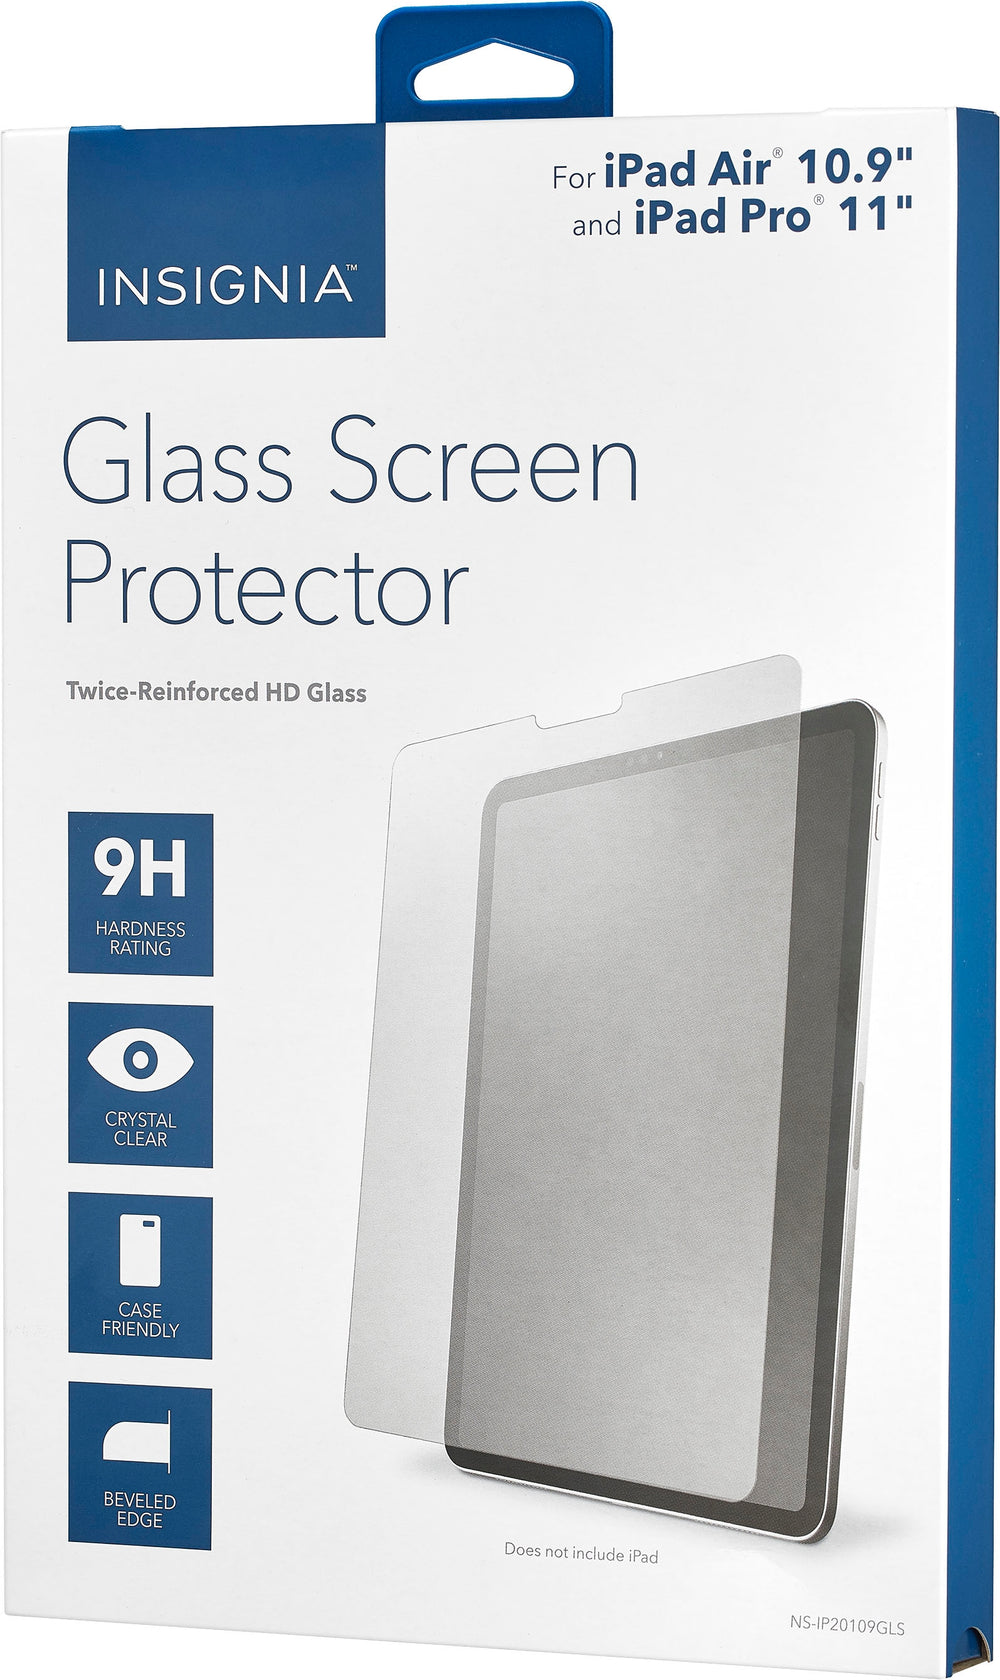 Insignia™ - Glass Screen Protector for Apple iPad Air 10.9" (4th/5th Generation) and iPad Pro 11" (1st/2nd/3rd Generation) - Clear_1